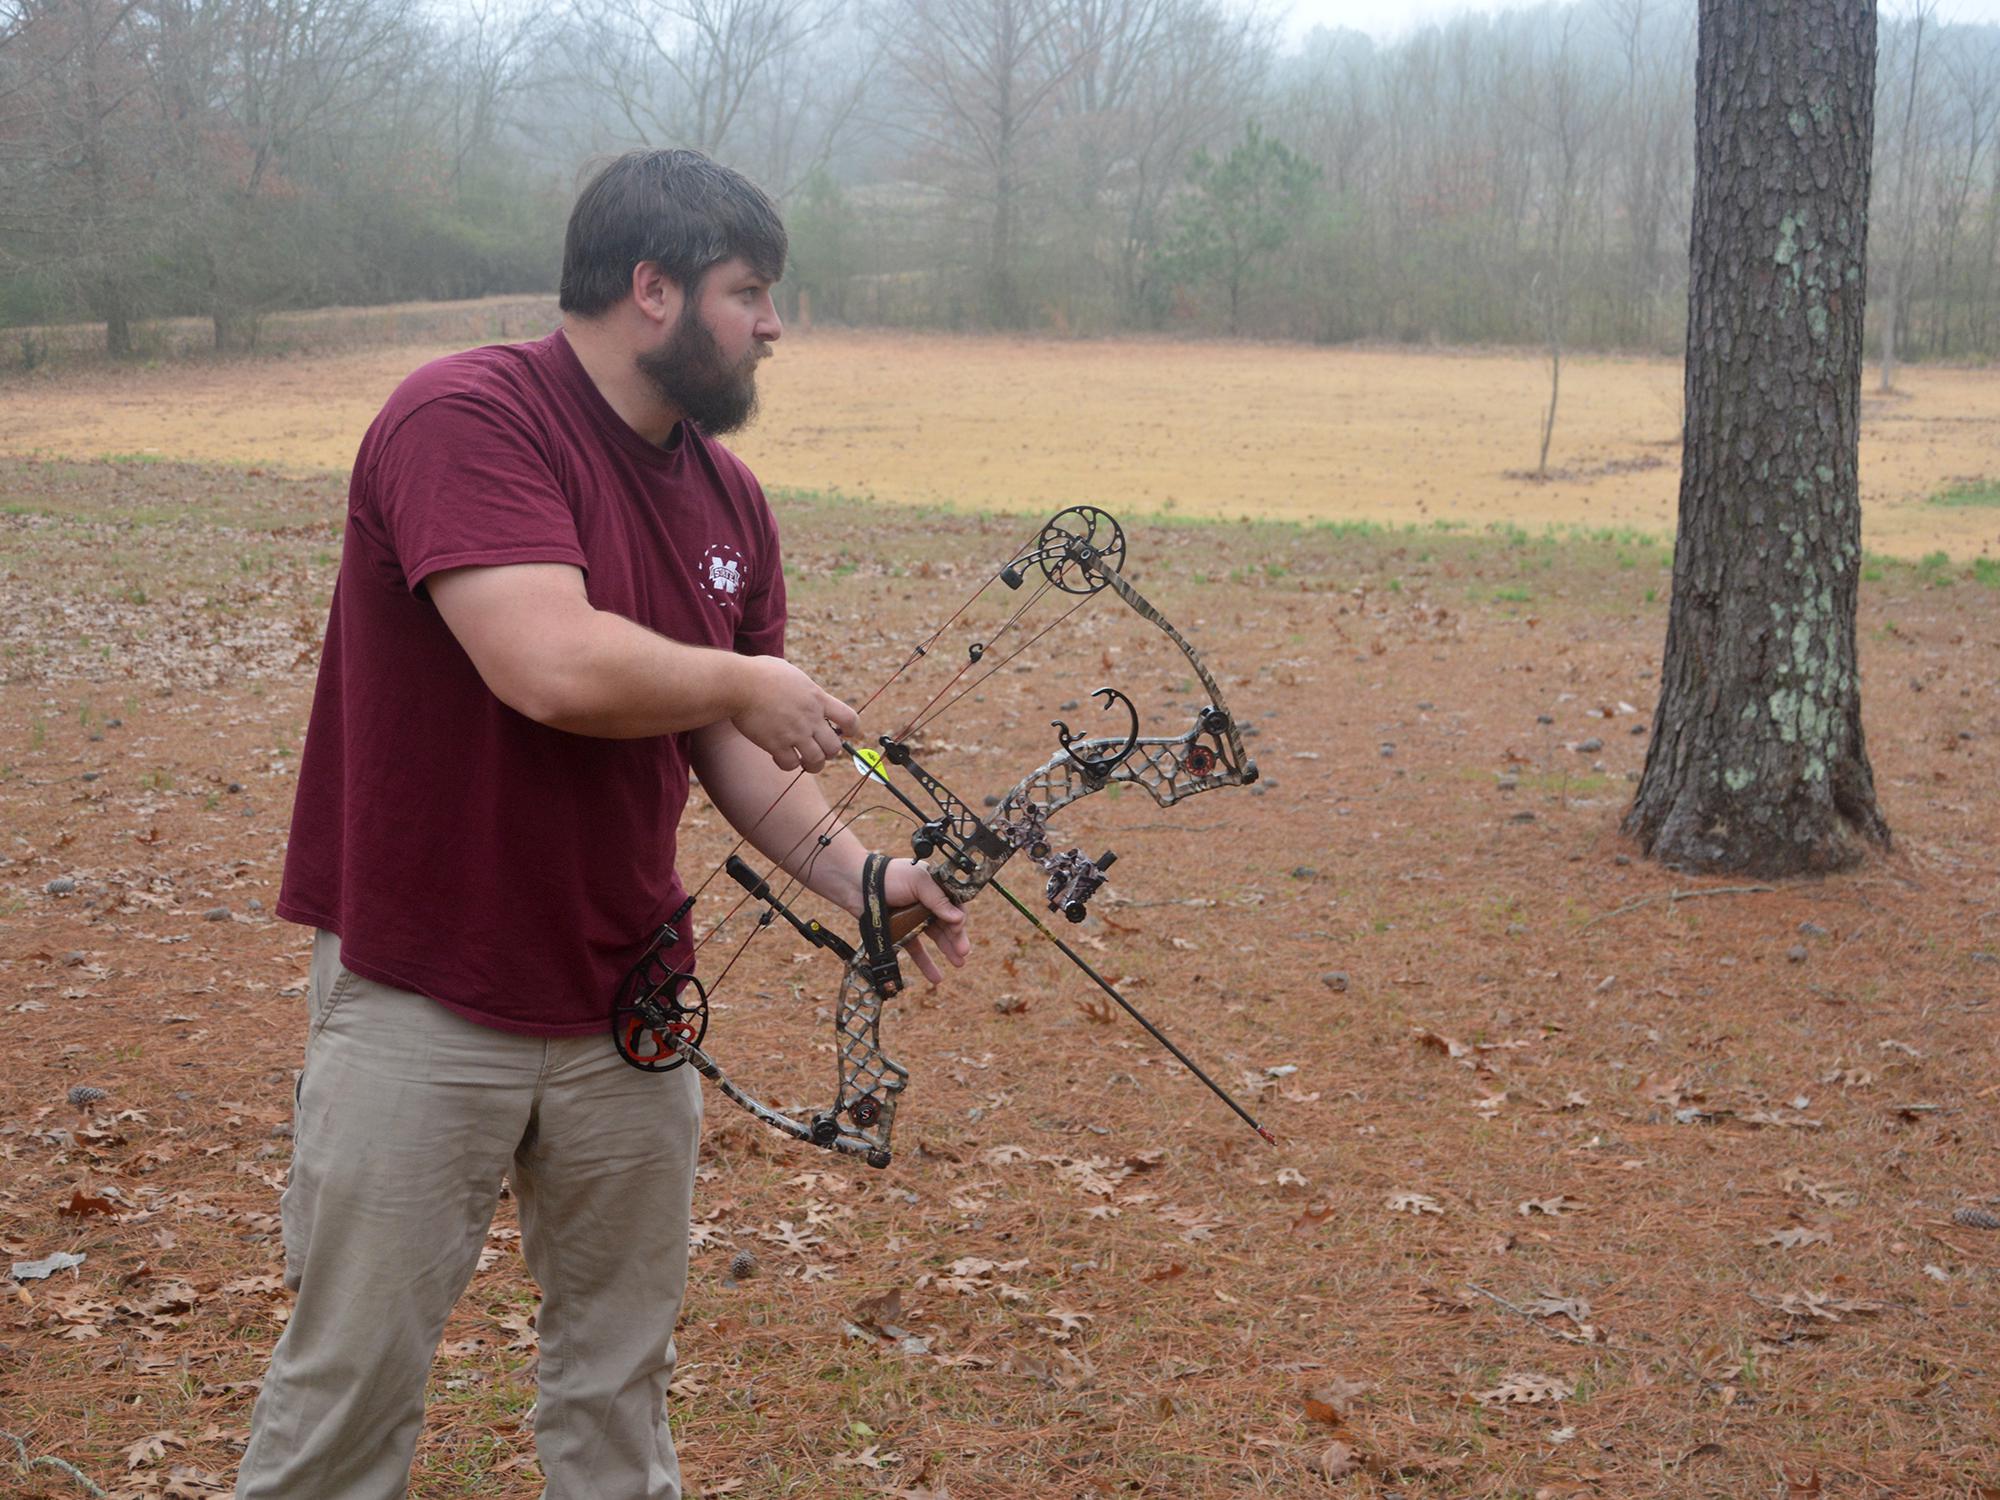 Many archers begin with a compound bow, which uses a system of pulleys and levers to bend the limbs of the bow. (Photo by MSU Extension Service/Linda Breazeale) 